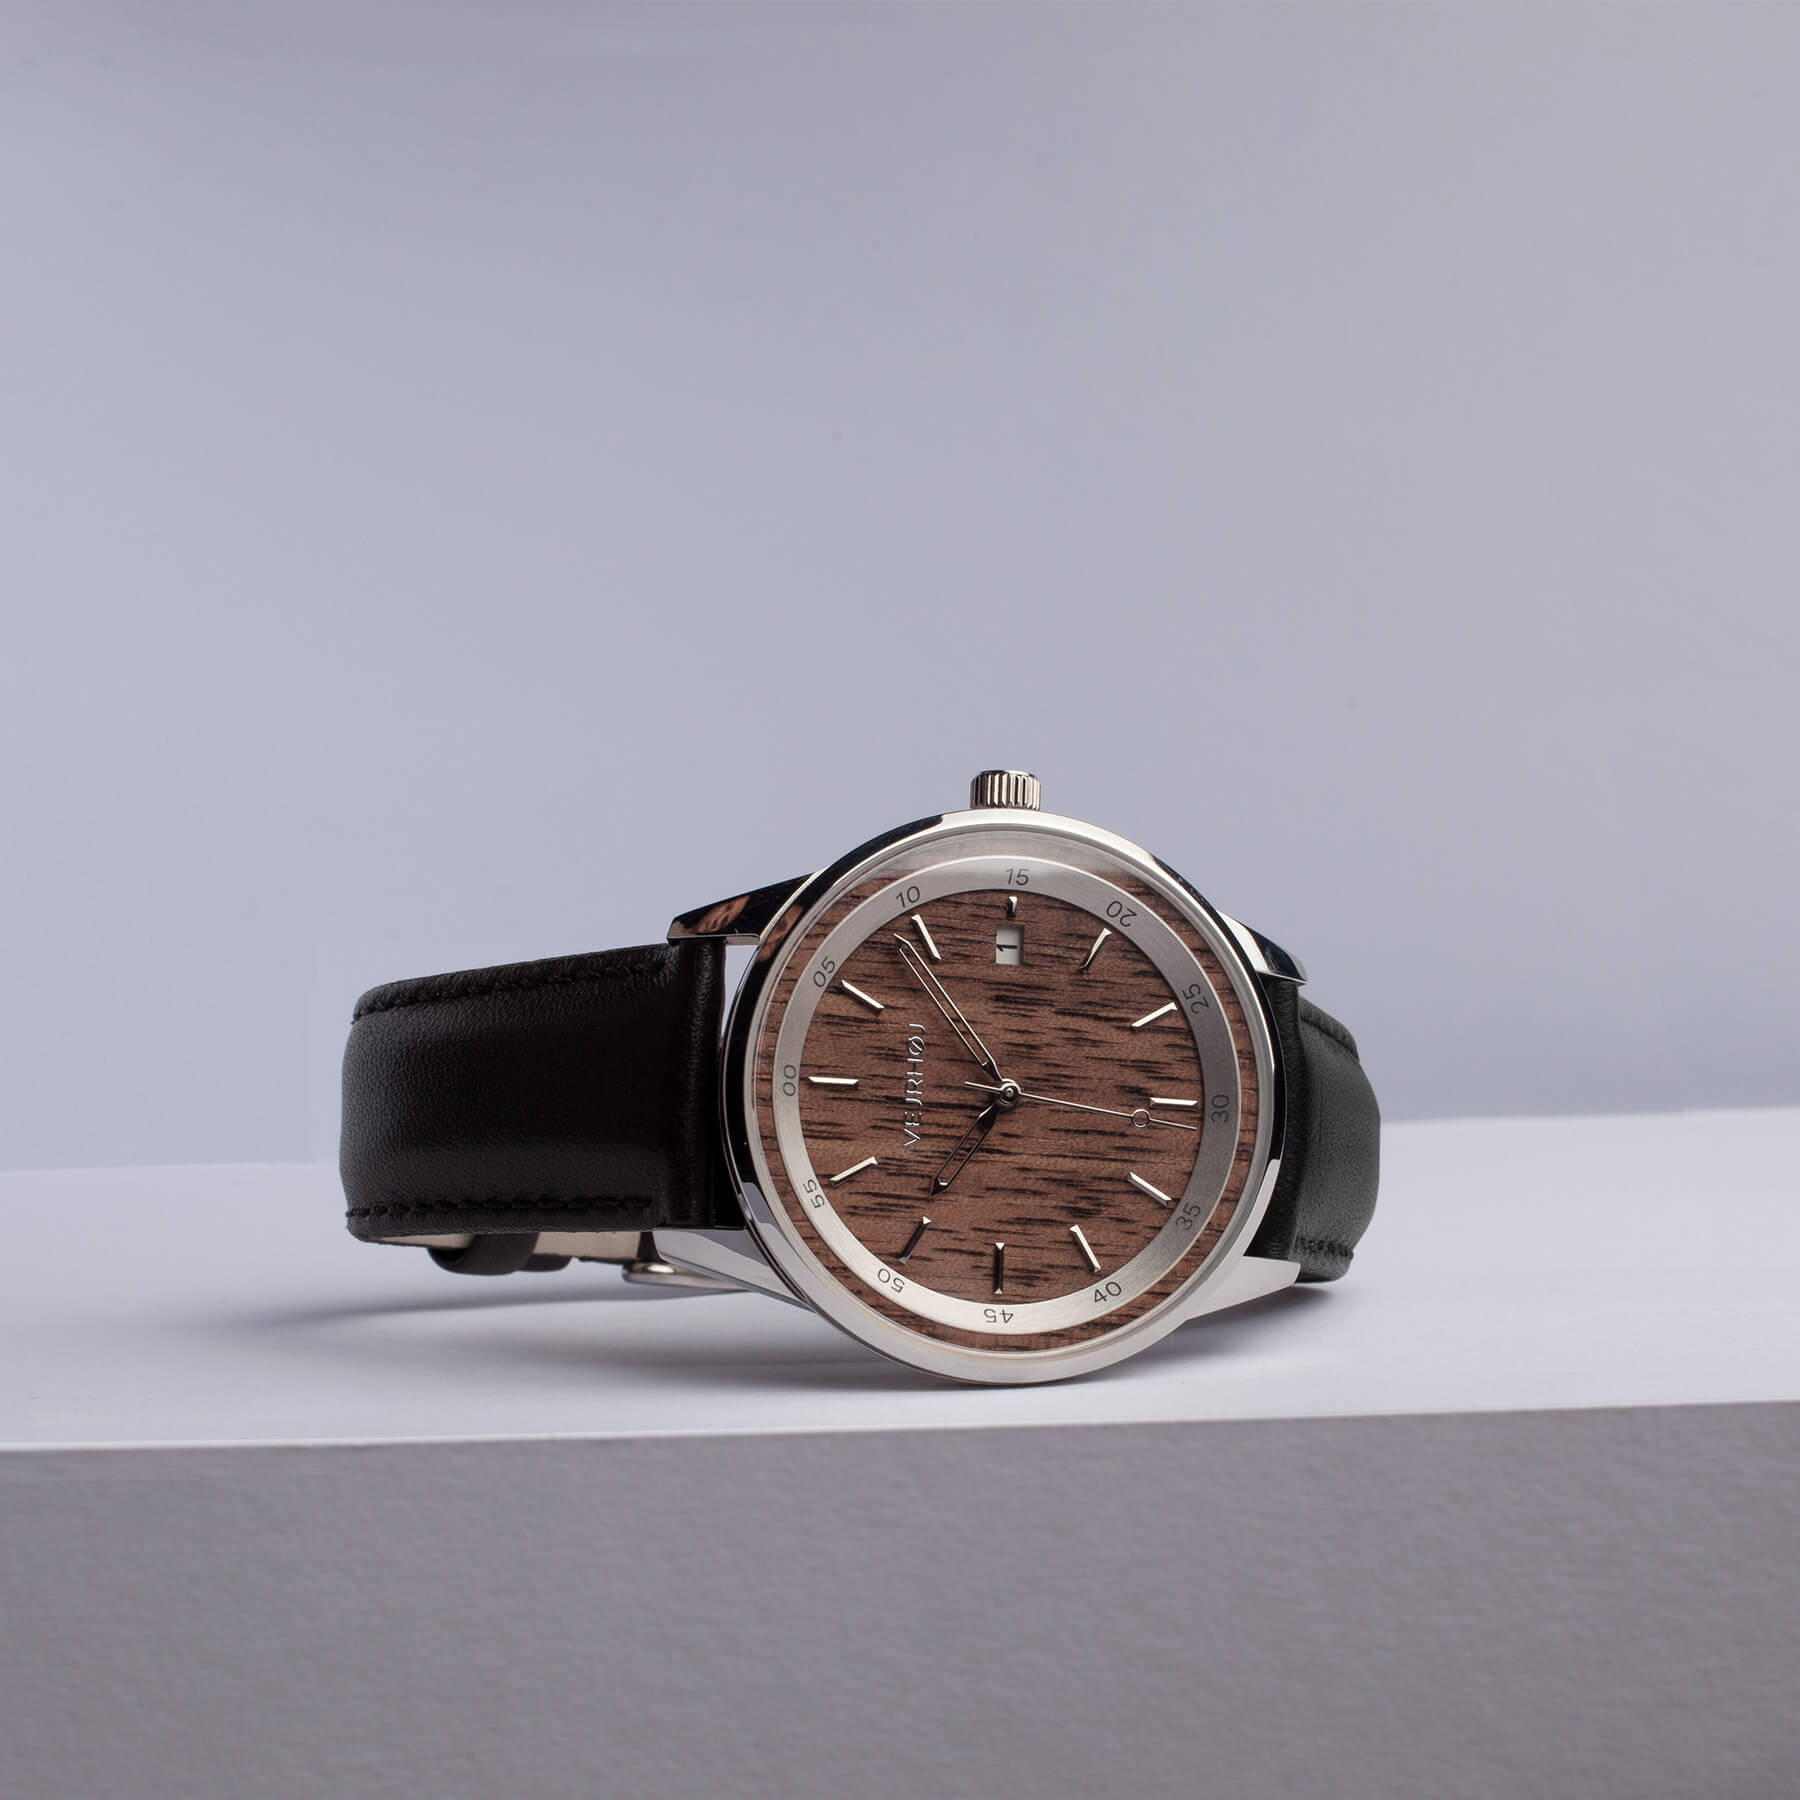 brown automatic wrist watch with black straps and silver hands and hour markings